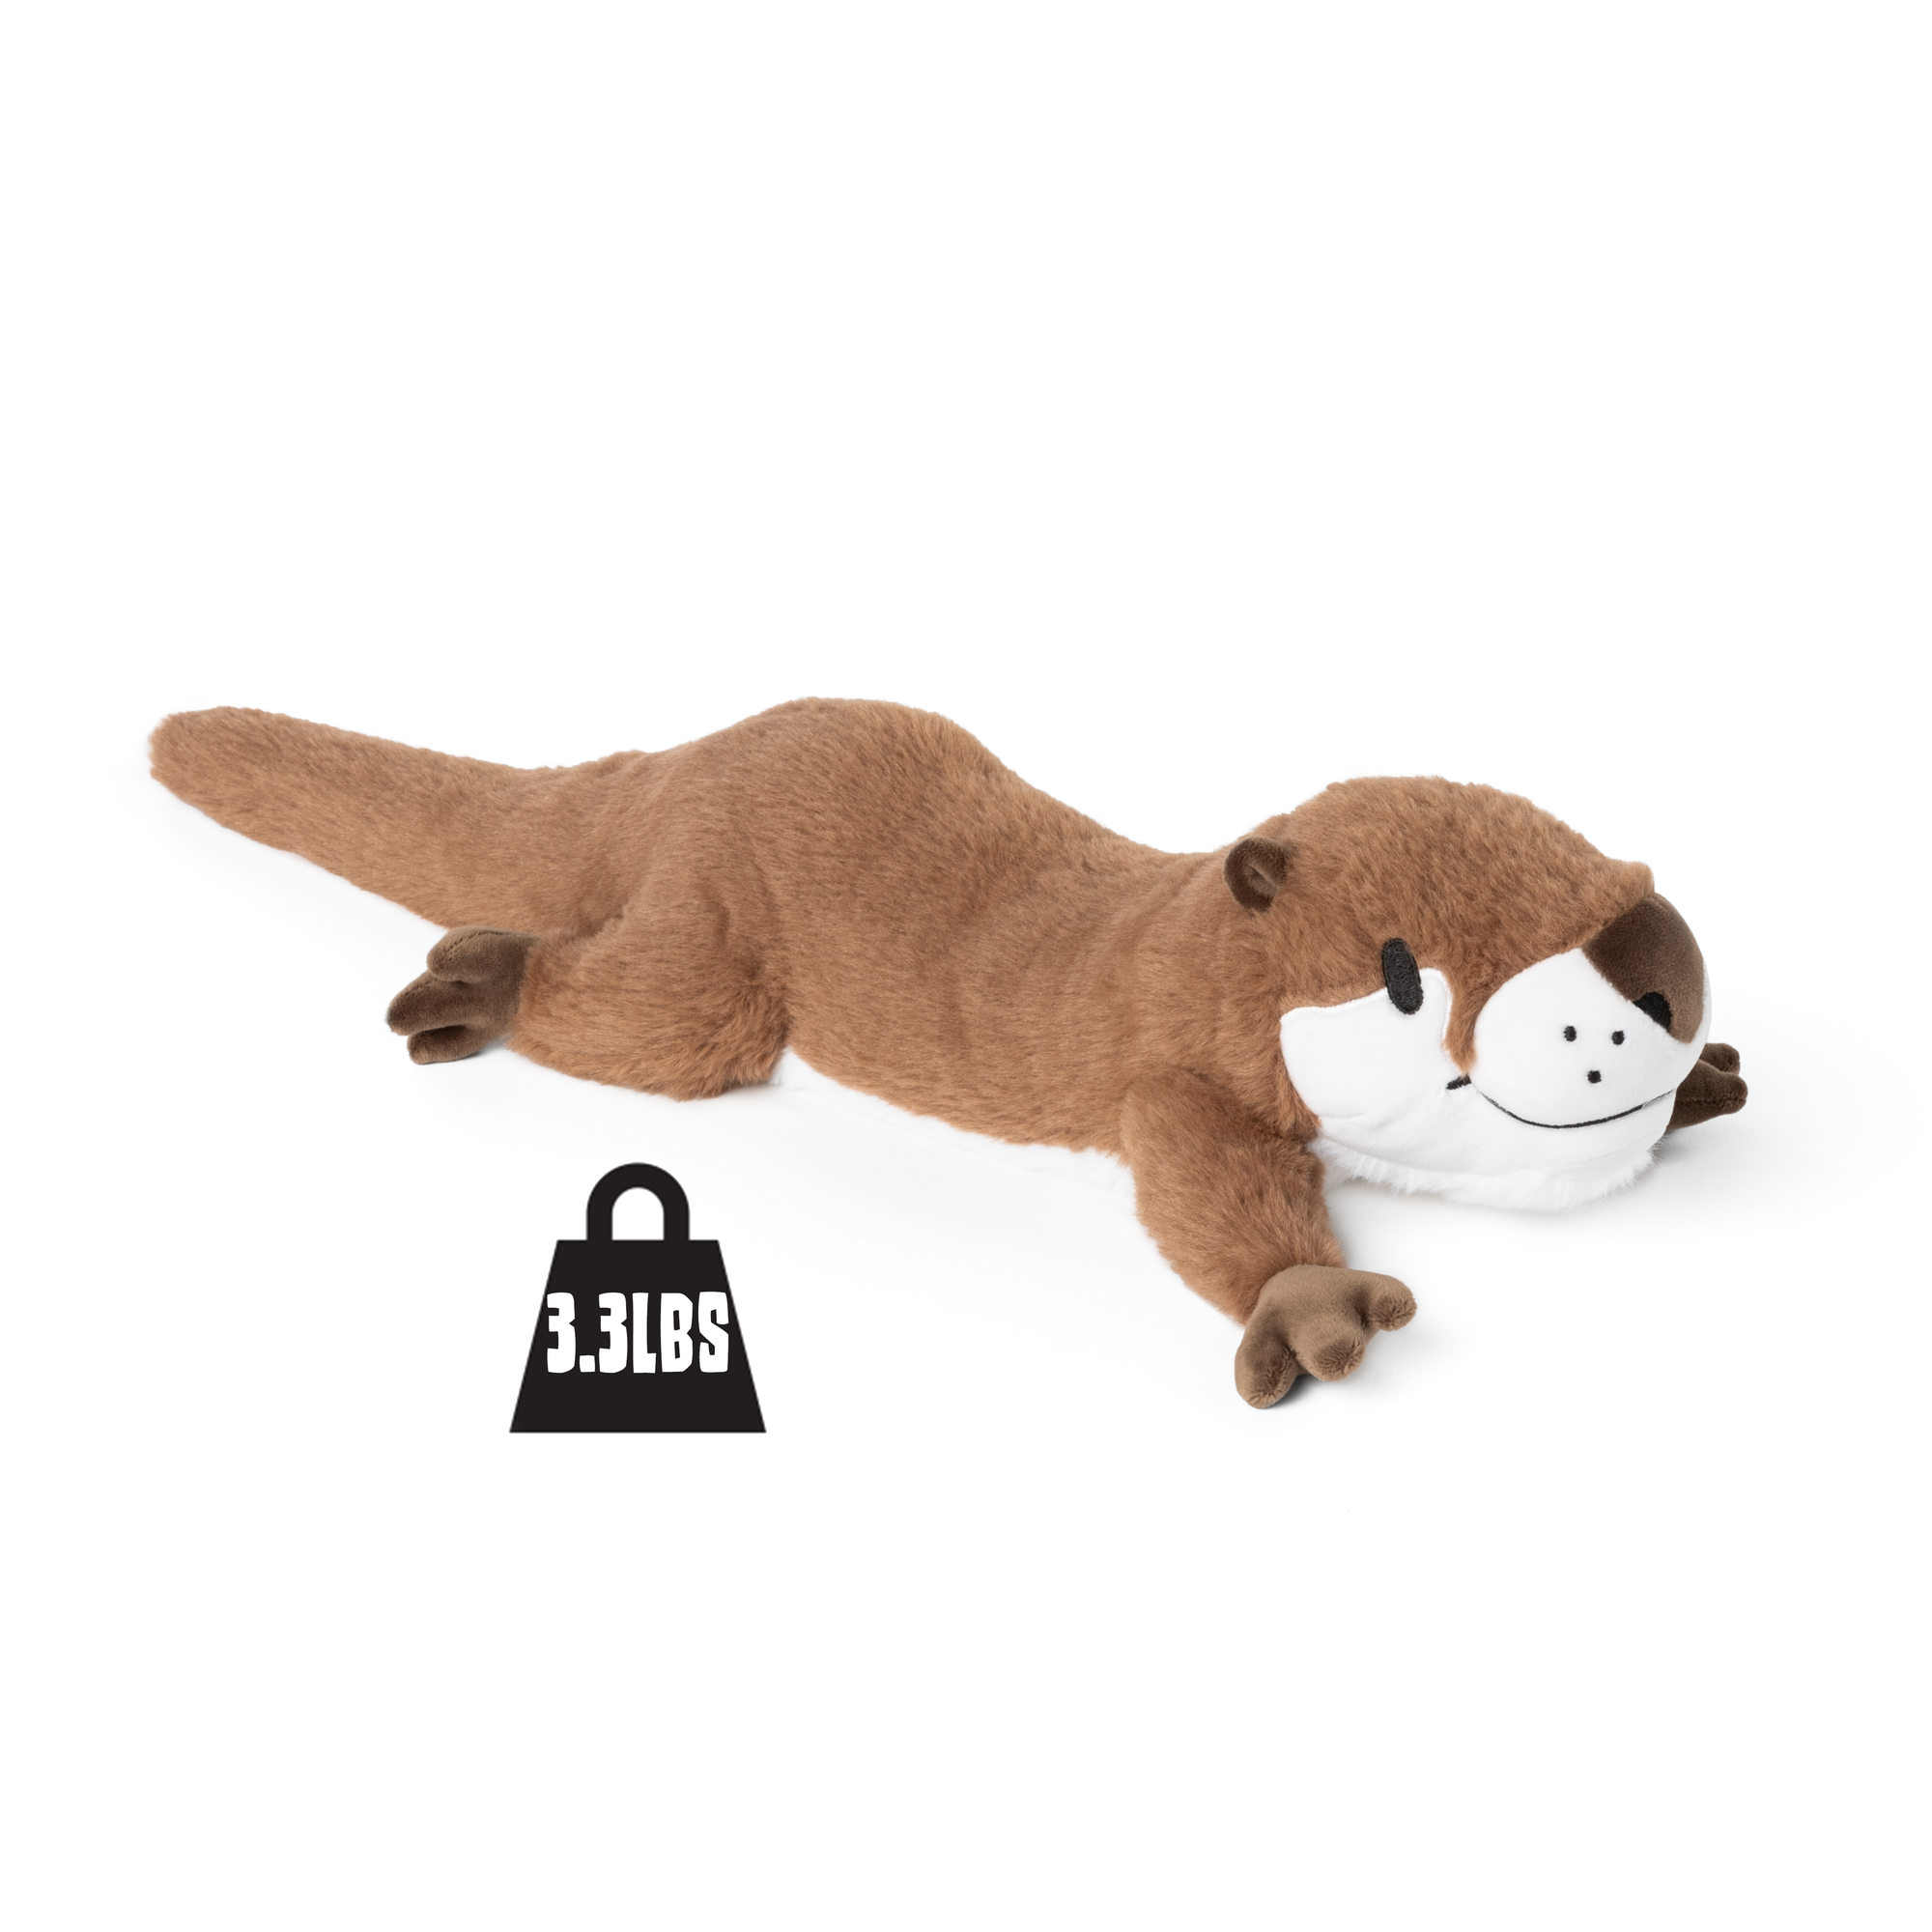 Weighted Otter